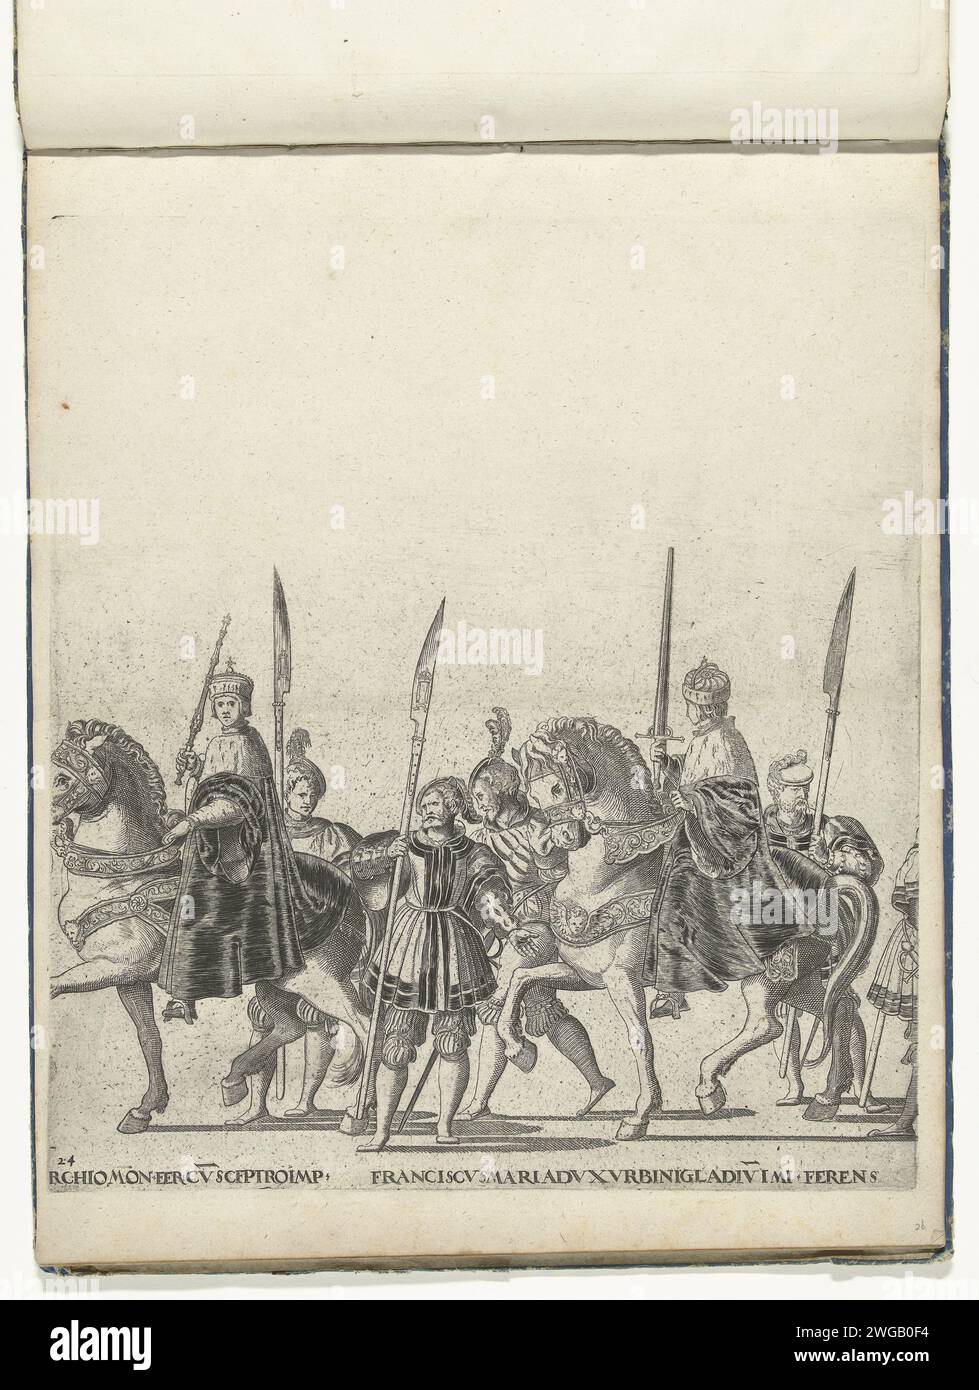 Boniface IV Paleologo, Markgraaf of Monferrato, with the imperial scepter and Francesco Maria della Rovere, Duke of Urbino, with the imperial sword, plate 24, 1615 - 1620 print Bonifatius IV Paleologo, Markgraaf of Monferrato, with the imperial scepter and Francesco Maria della Rovere, Duke of Urbino, with the imperial sword, plate 24. Procession of Charles V with the Pope Clemens VII in Bologna after his coronation to emperor, 24 February 1530 . print maker: Mechelenpublisher: The Hague paper etching / engraving festivities (+ parade, pageant, cavalcade  festive activities) Bologna Stock Photo